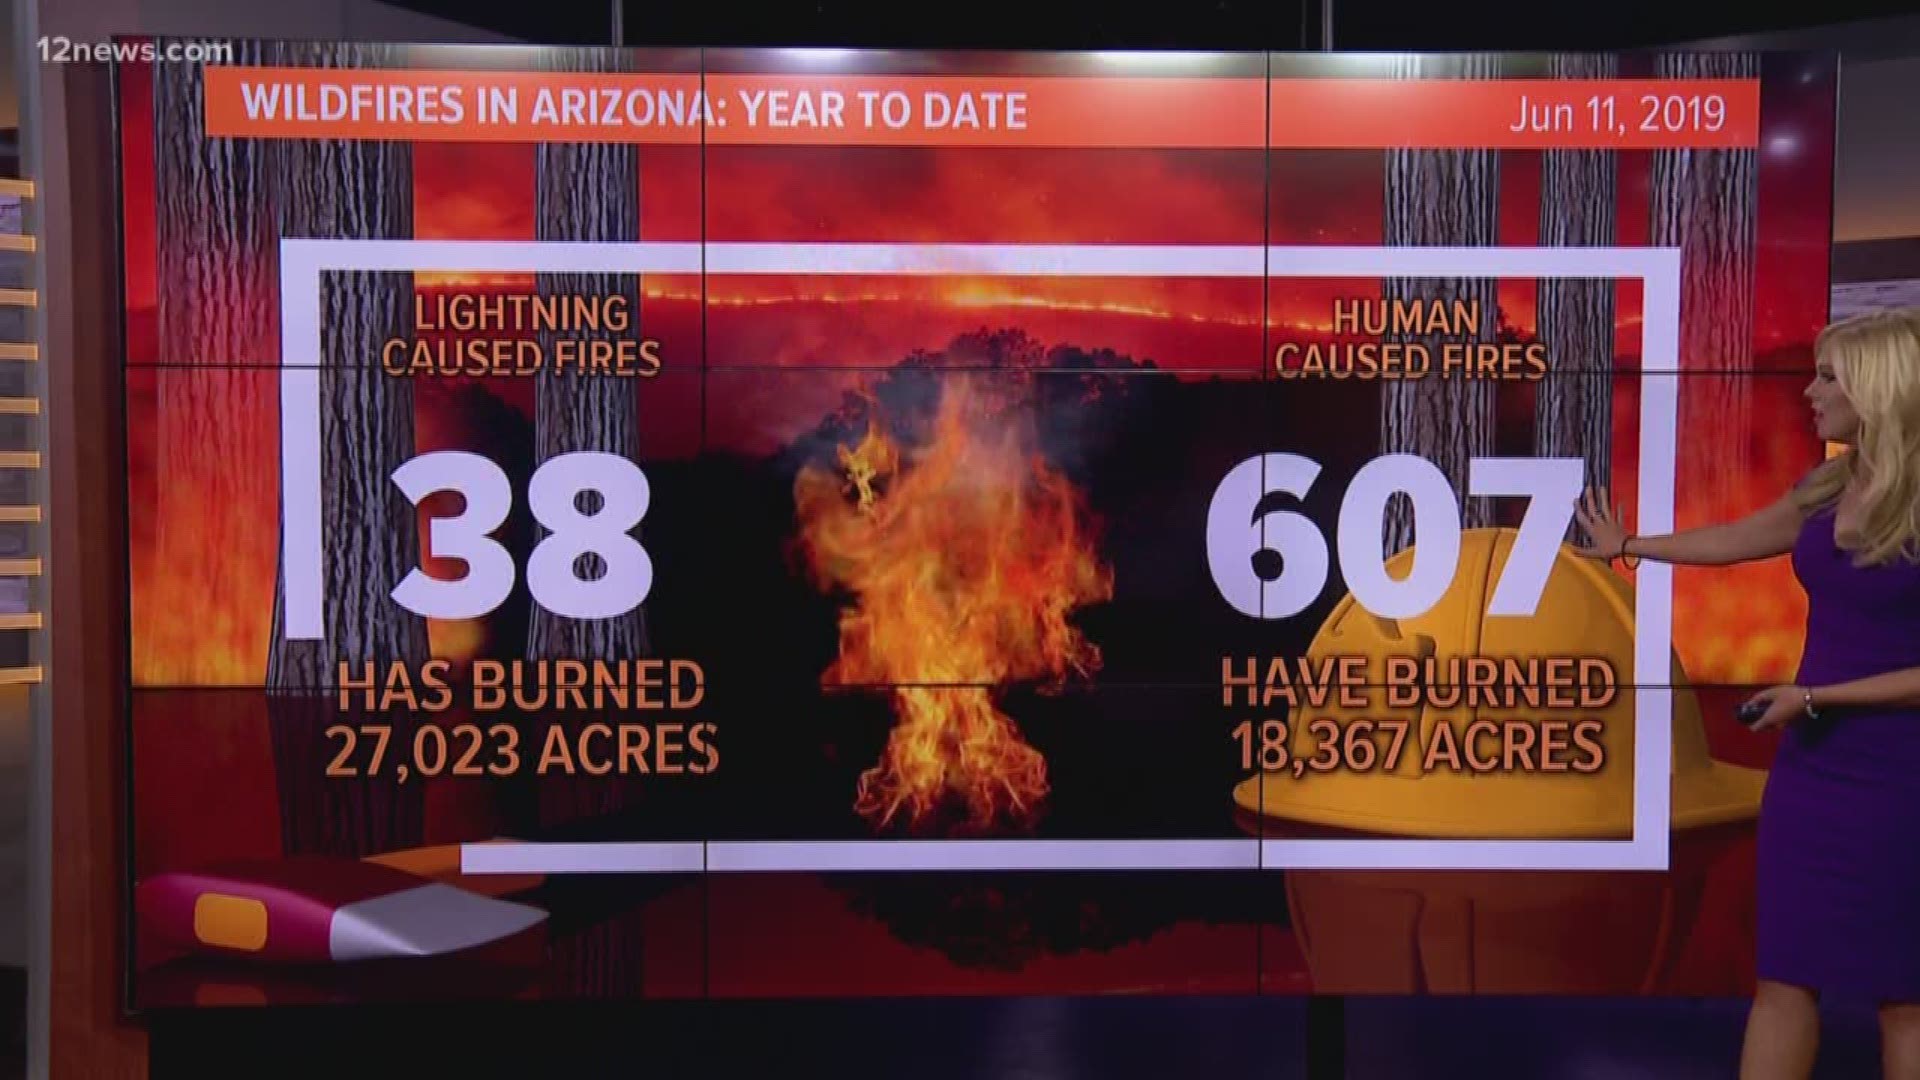 Human-caused fires in 2019 have already burned more than 18,000 acres in Arizona so far.